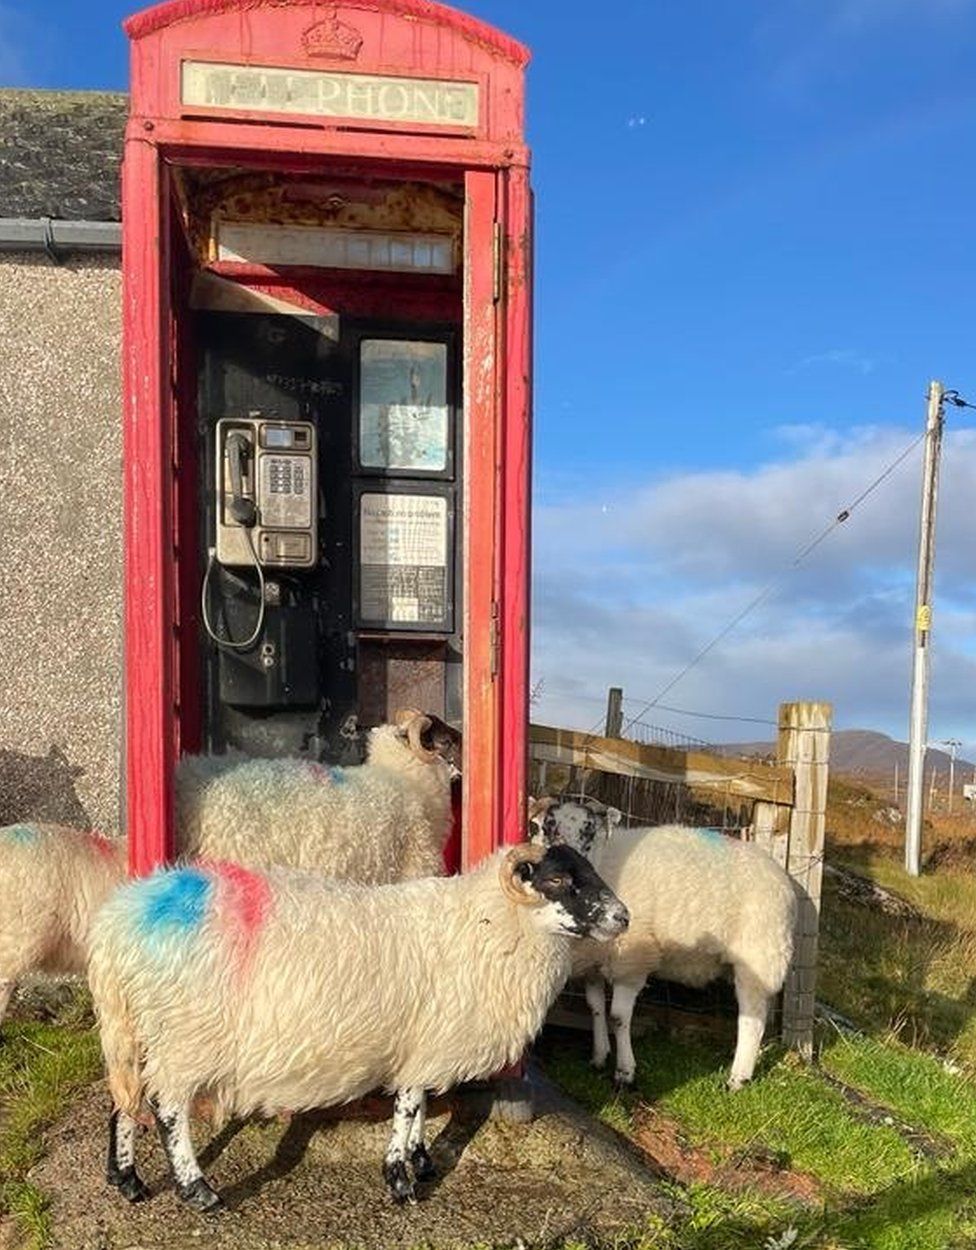 Sheep gathering in an around an old red telephone box